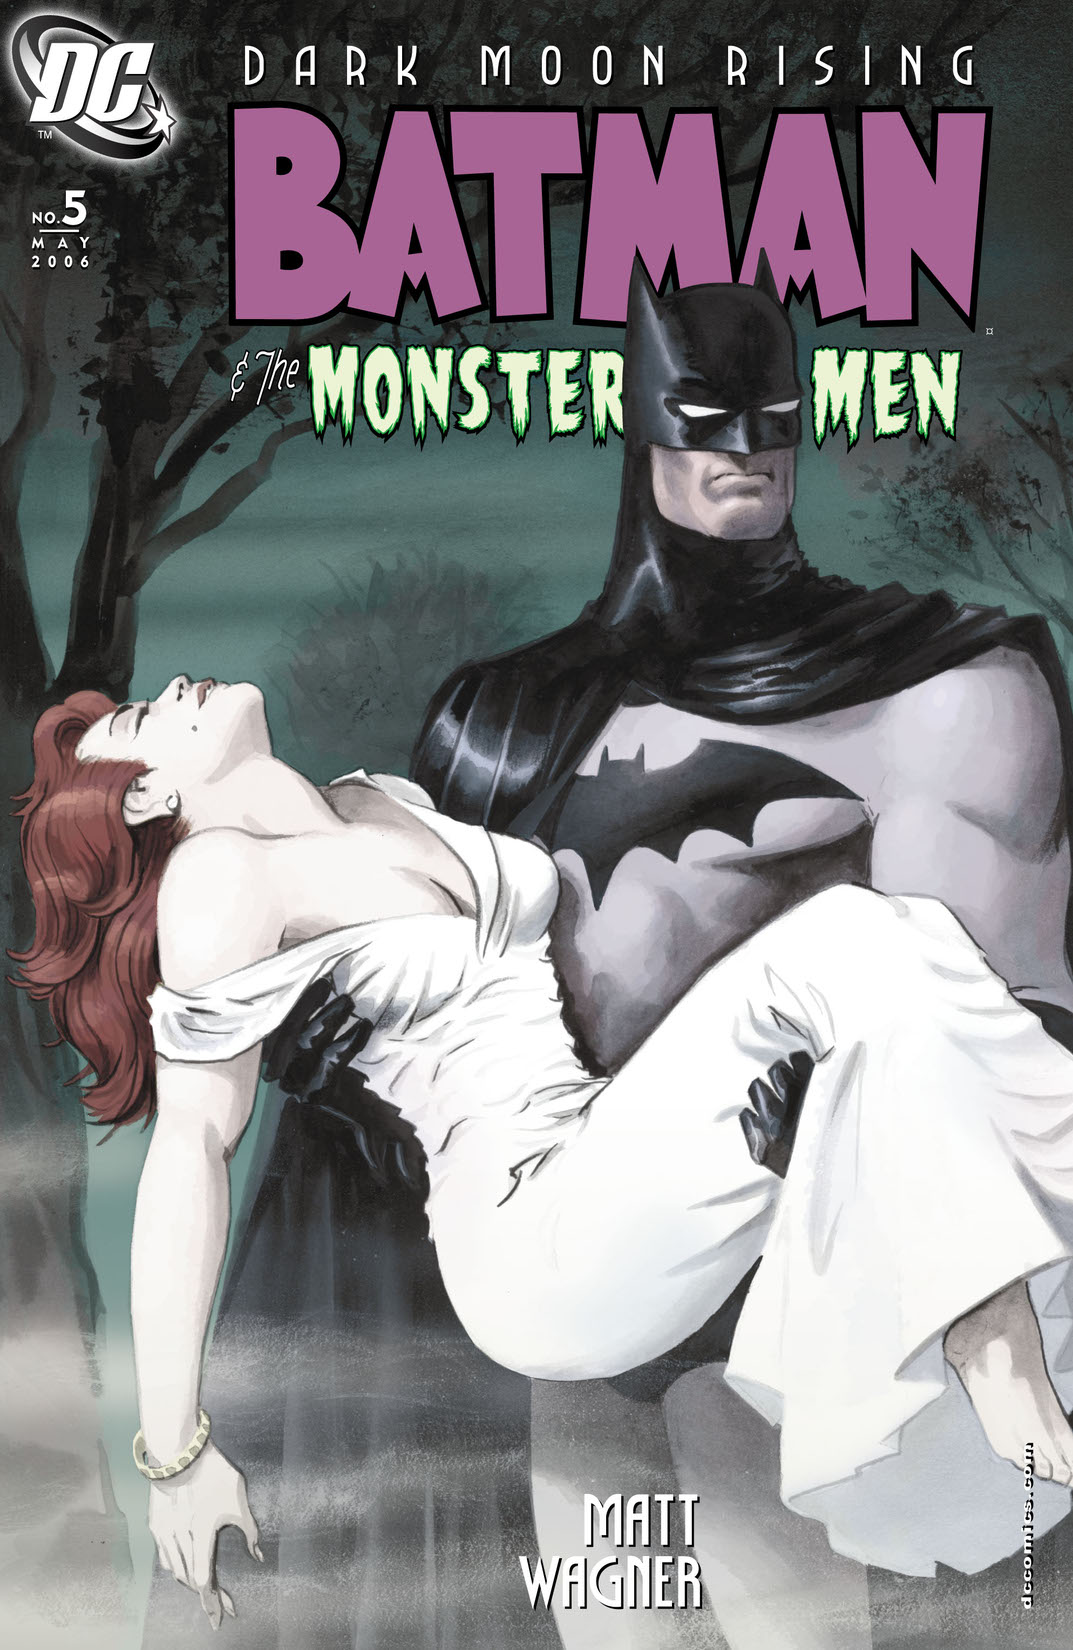 Batman and the Monster Men #5 preview images